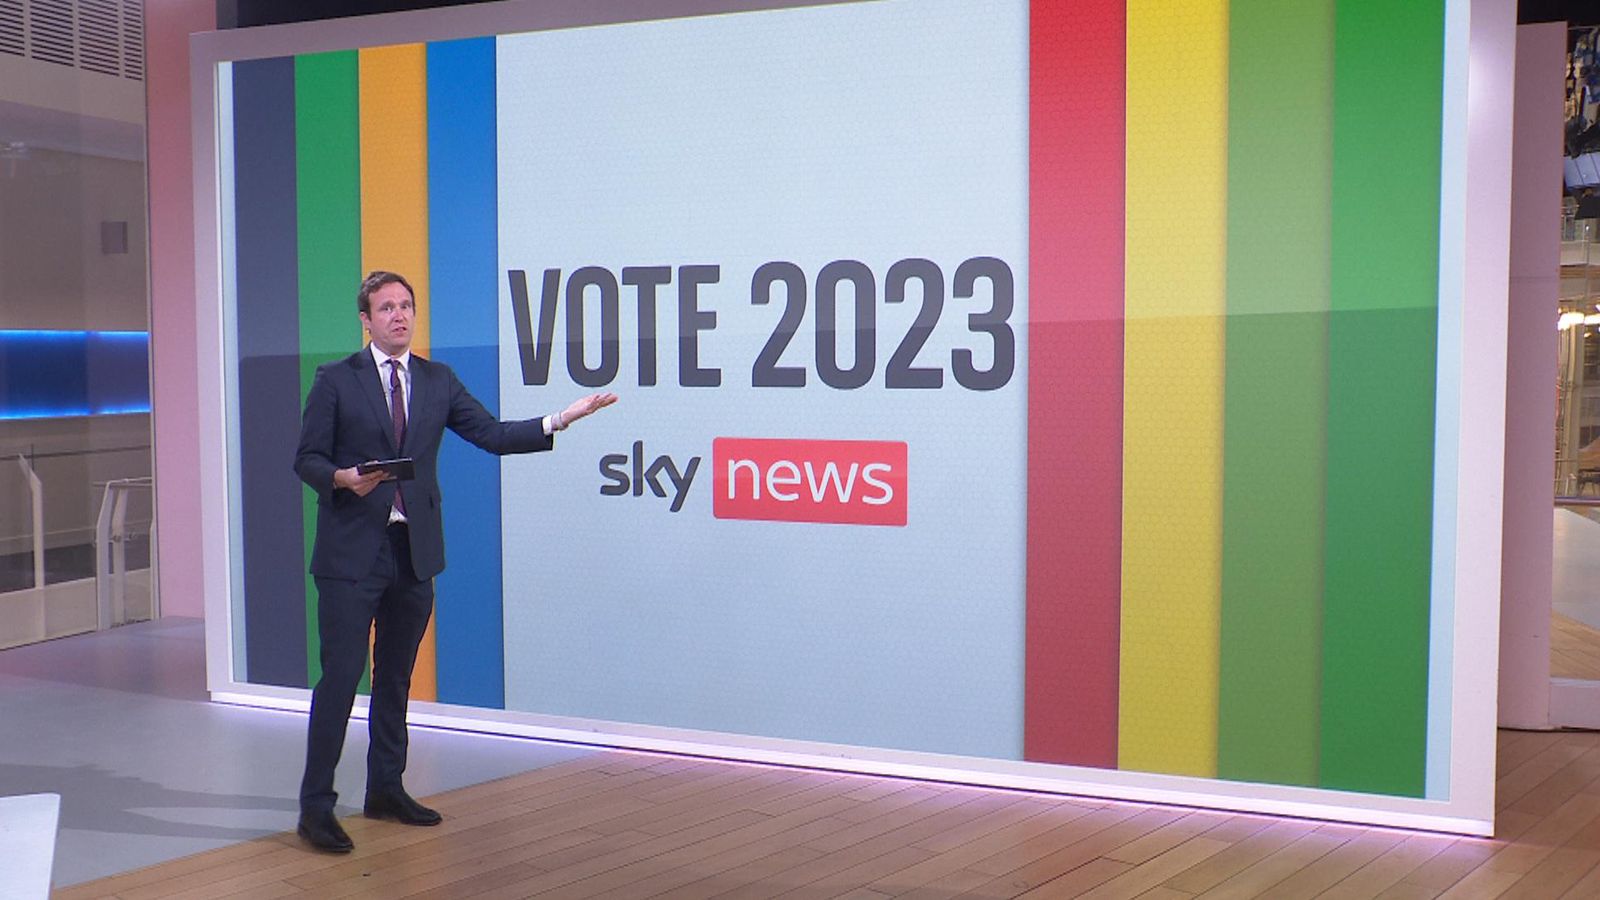 Explained Voter share ahead of 2023 local elections News UK Video